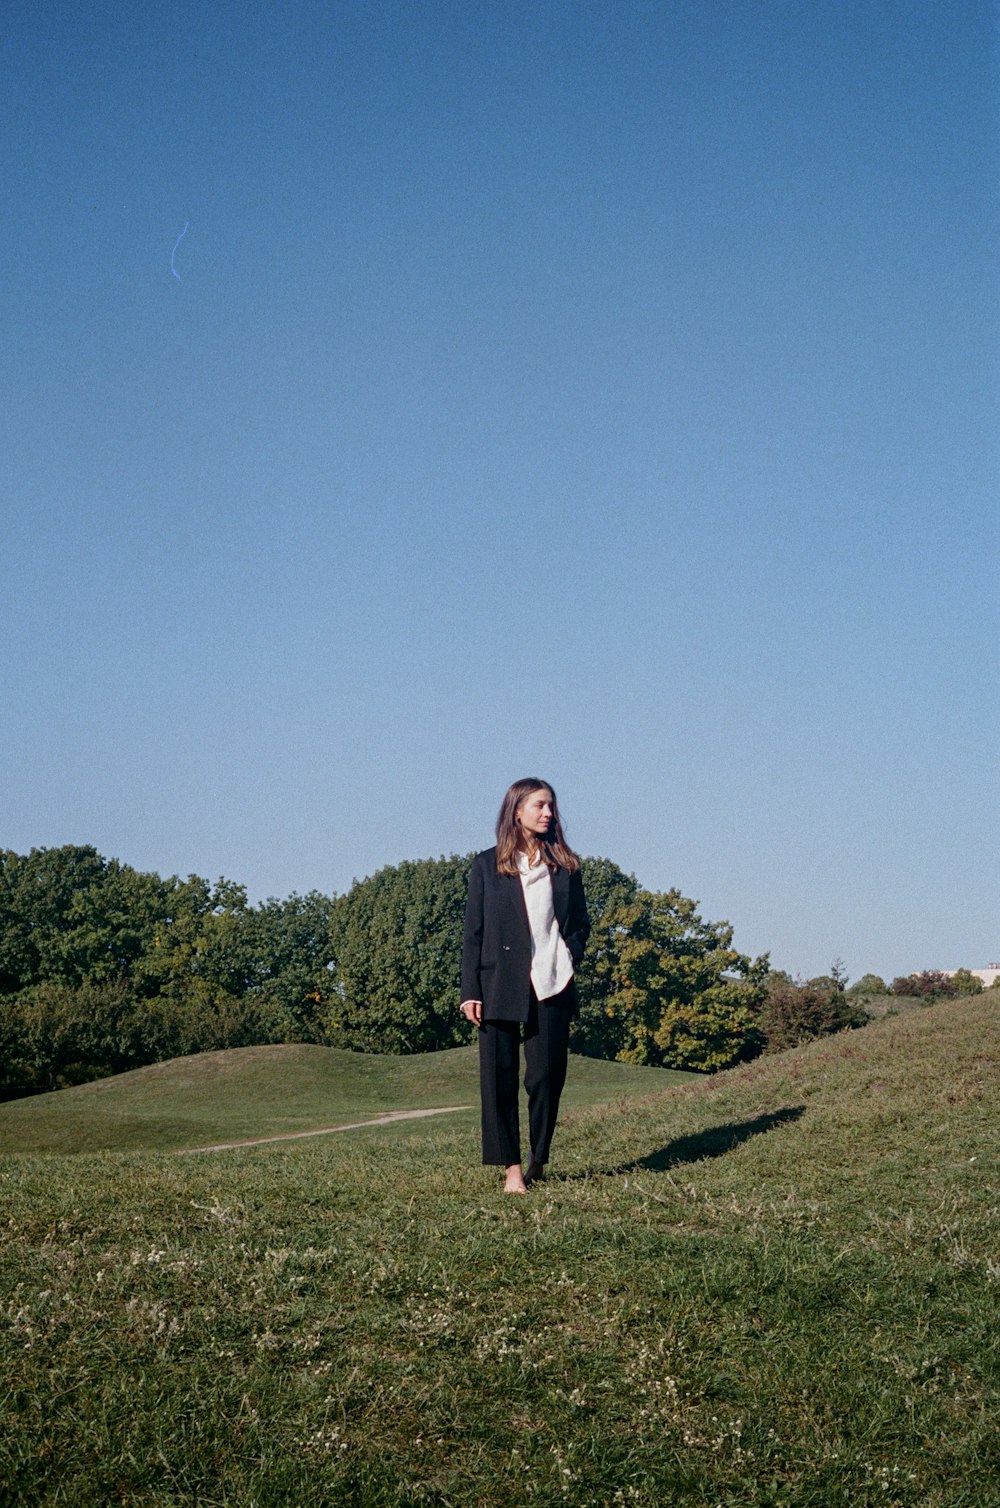 a woman standing in a field with a kite in the sky